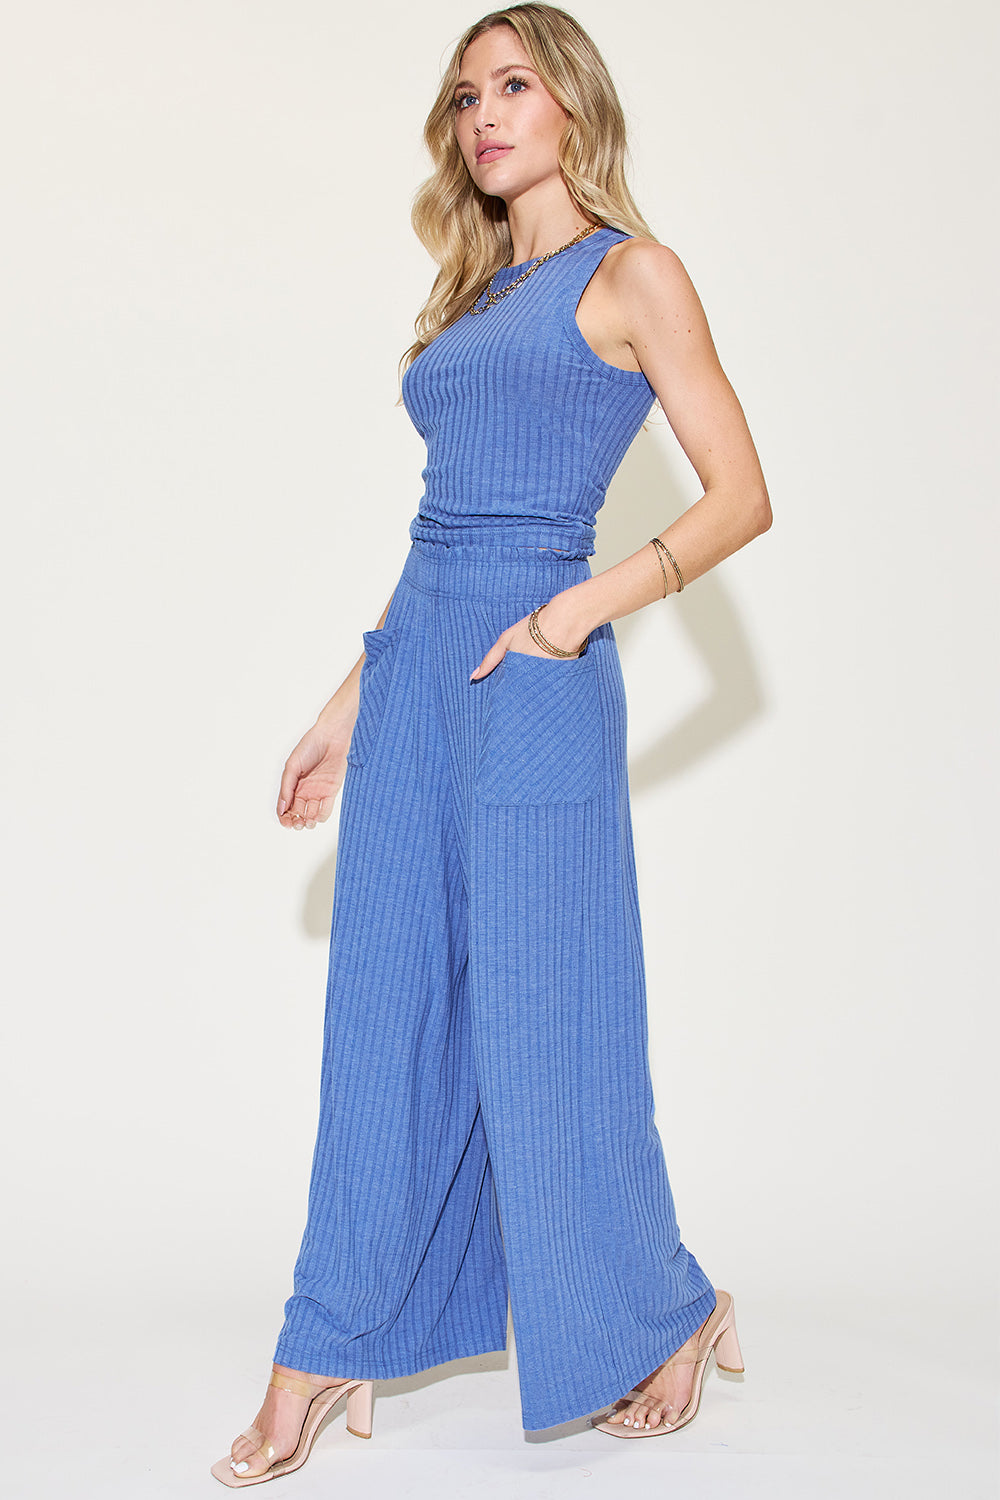 Basic Bae Ribbed Tank and Wide Leg Pants Two Piece Set